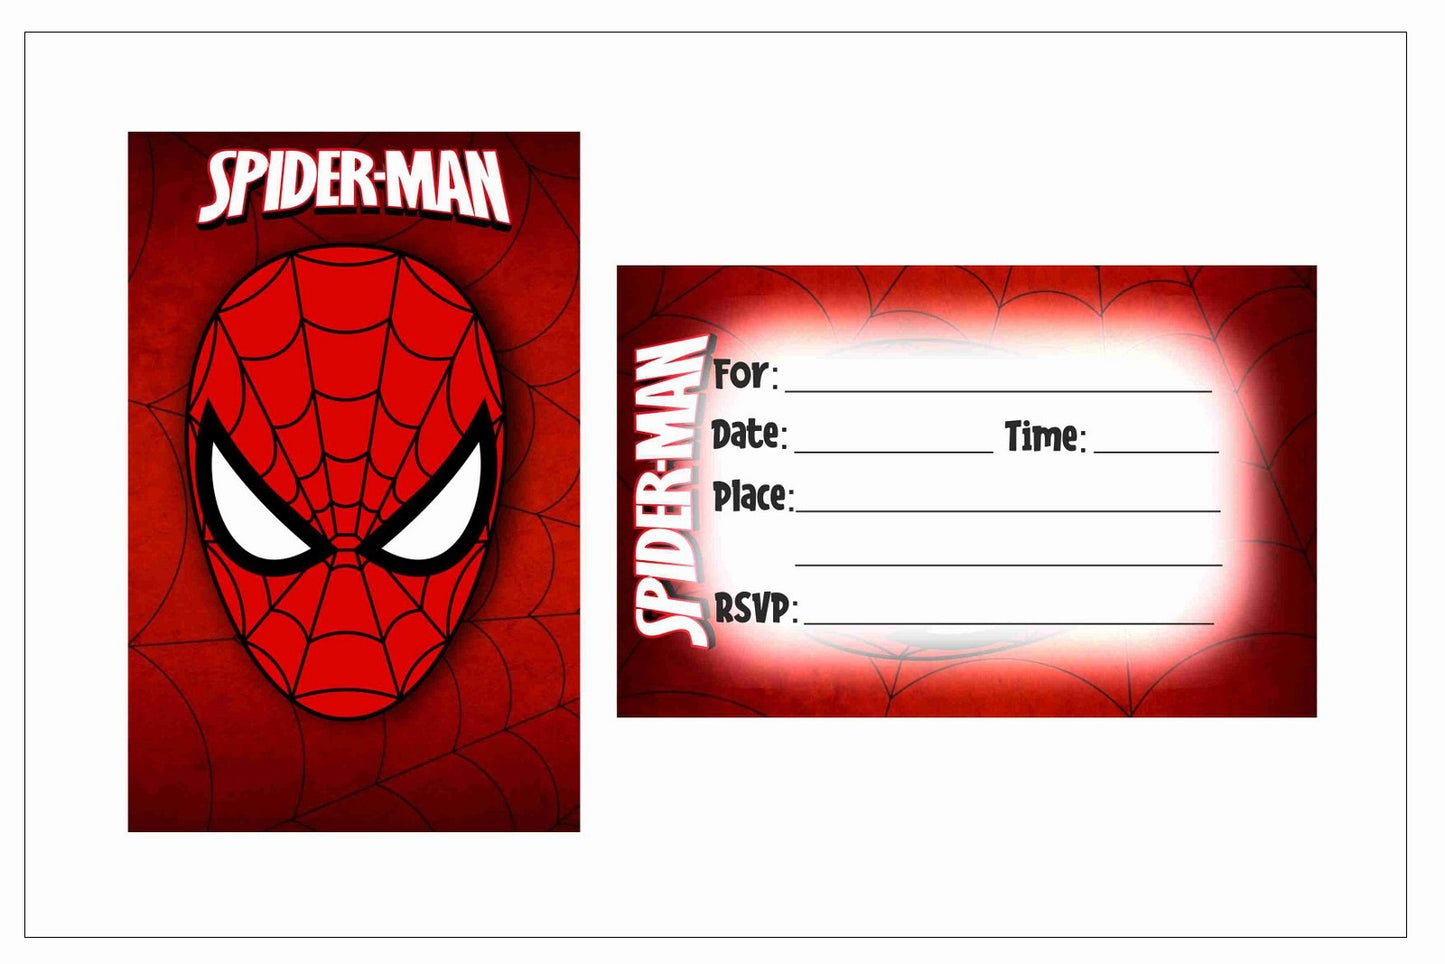 Spiderman Theme Children's Birthday Party Invitations Cards with Envelopes - Kids Birthday Party Invitations for Boys or Girls,- Invitation Cards (Pack of 10)